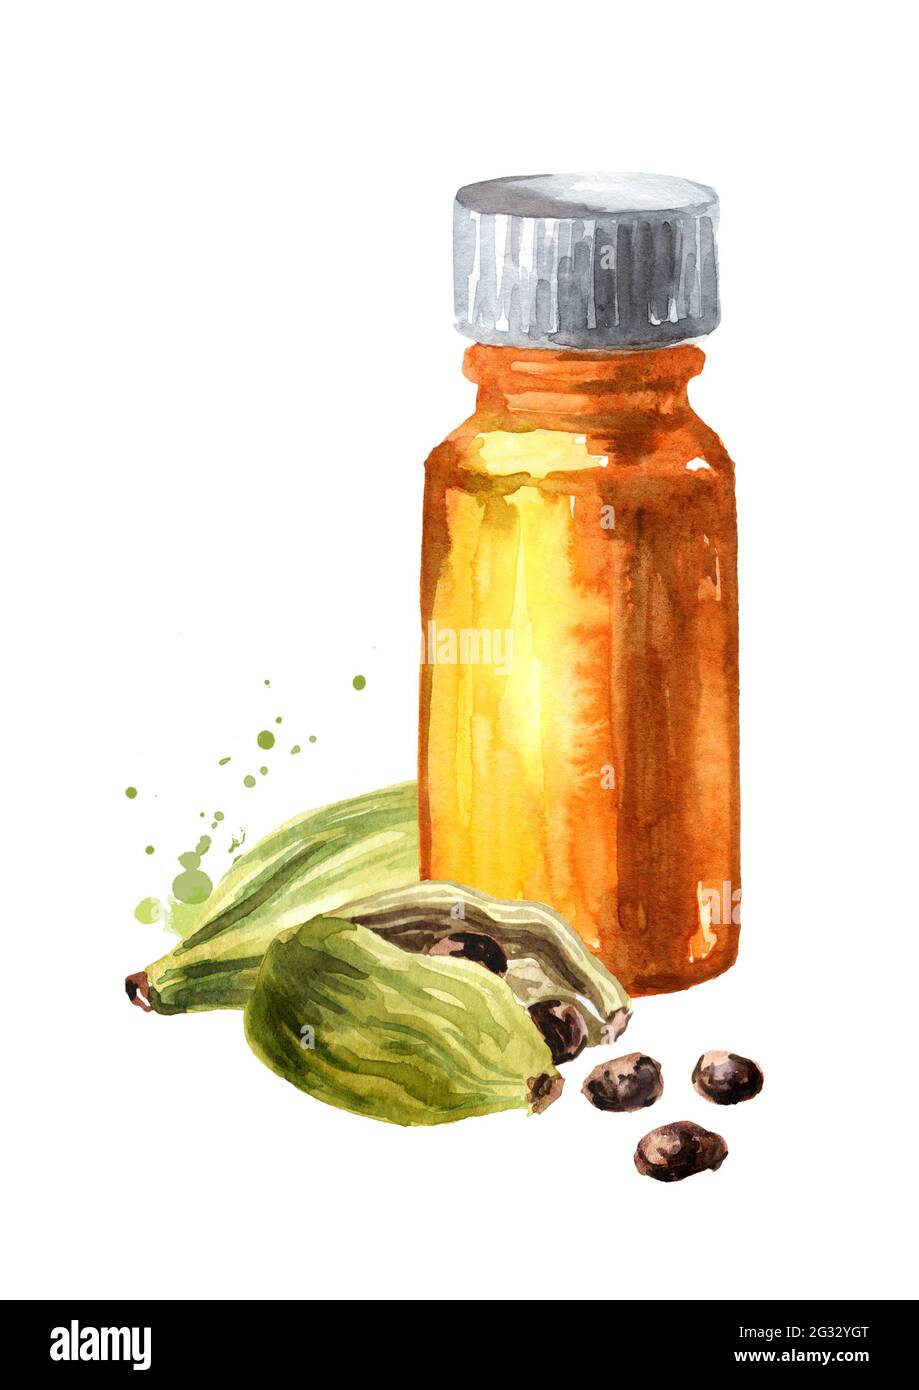 Cardamon pods and bottle of essential oil. Hand drawn watercolor illustration, isolated on white background Stock Photo